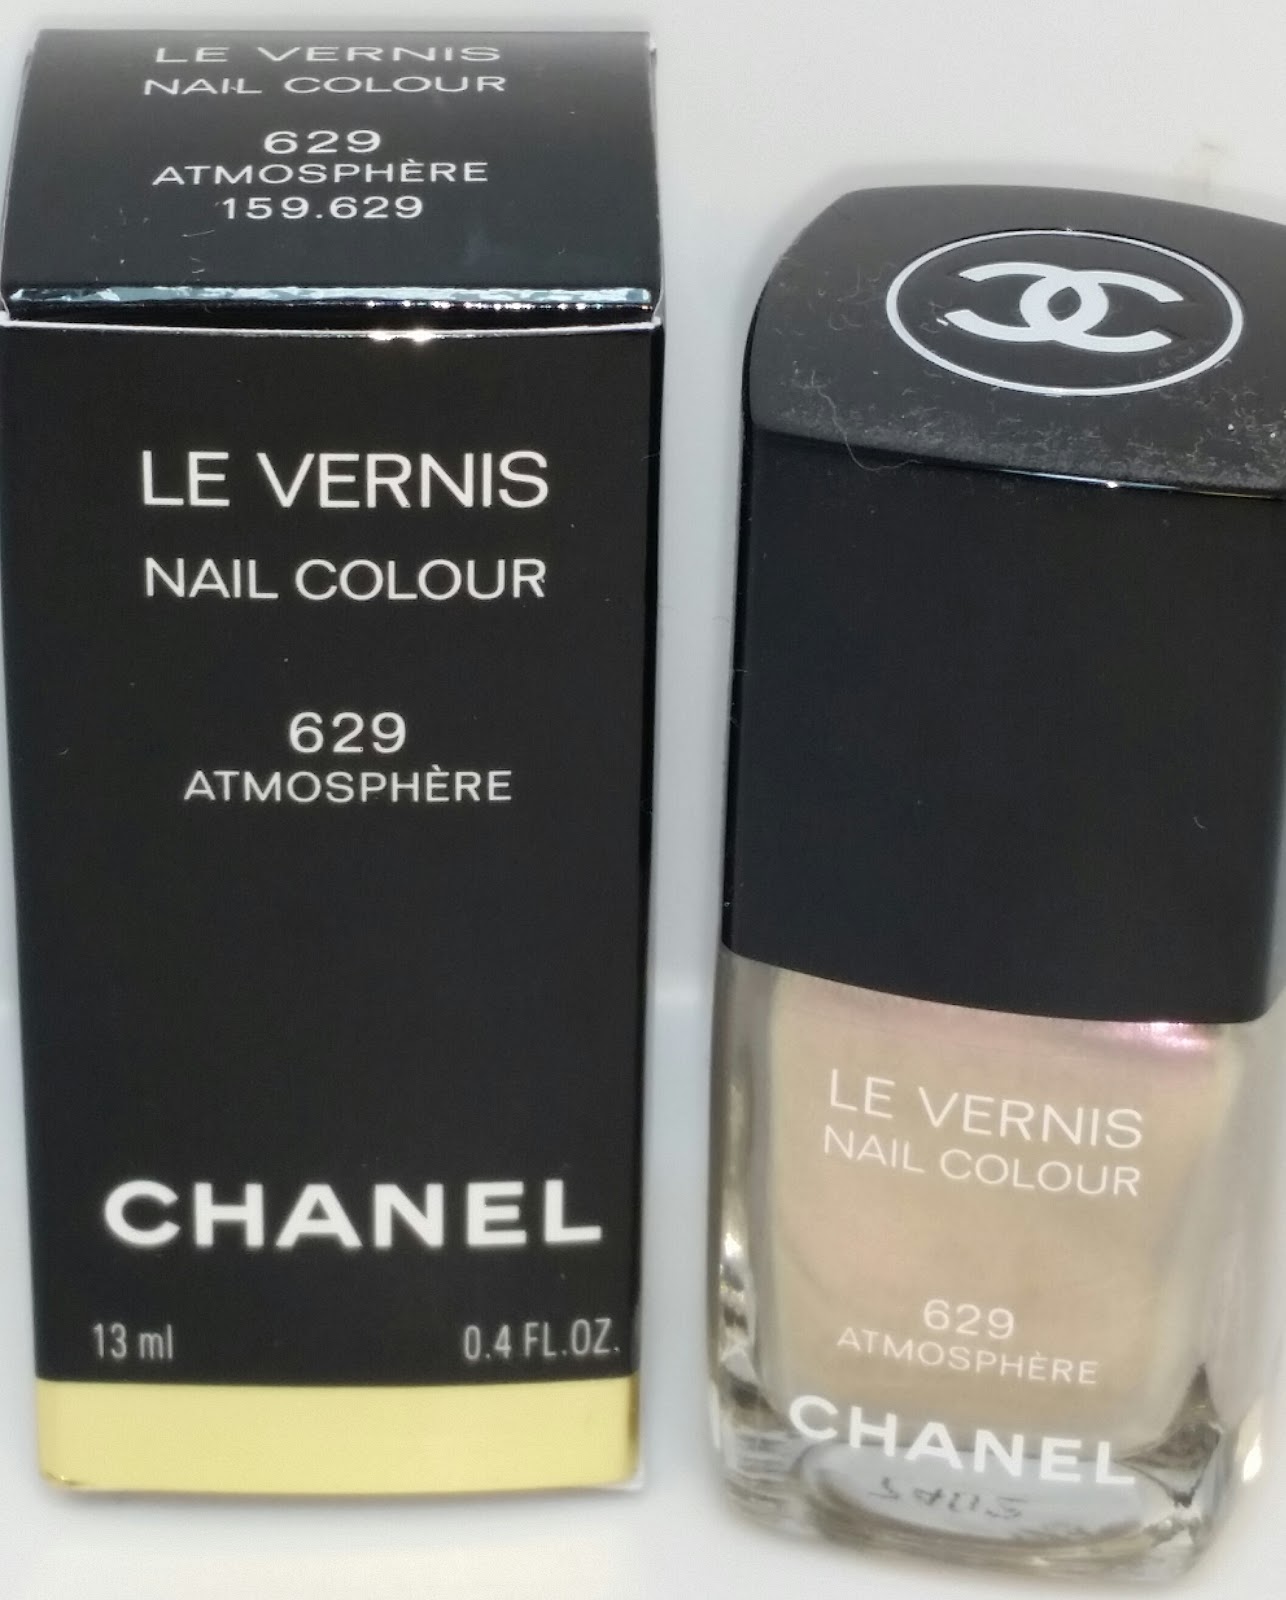 Jayded Dreaming Beauty Blog : 629 ATMOSPHERE CHANEL LE VERNIS NAIL COLOUR - SWATCHES  AND REVIEW